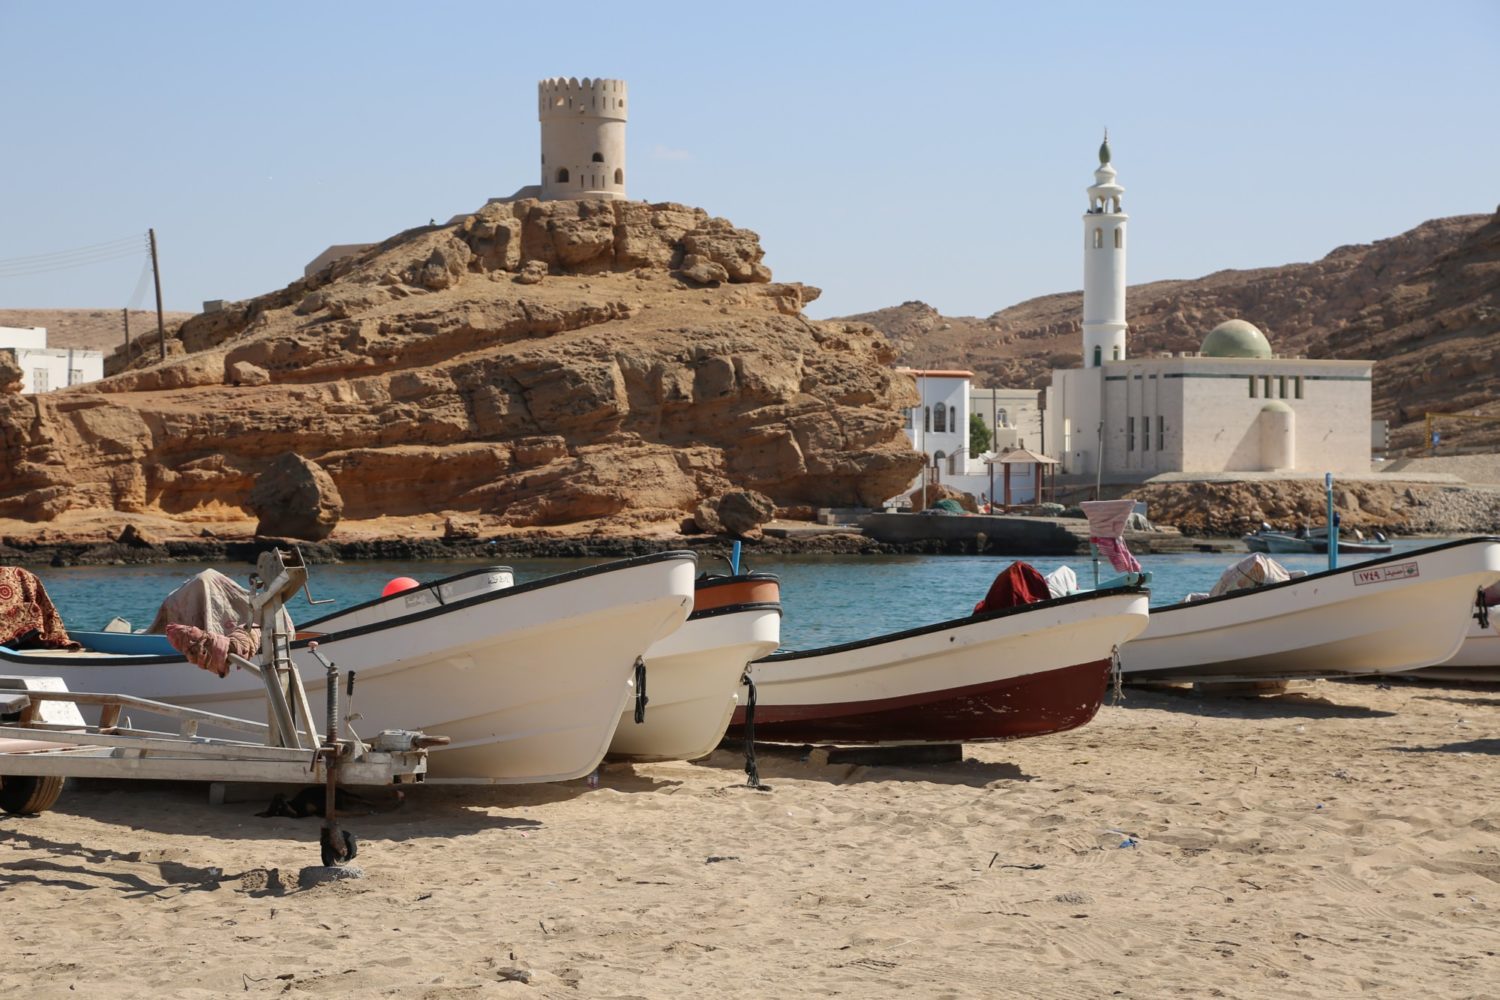 Sur Oman tower and boats